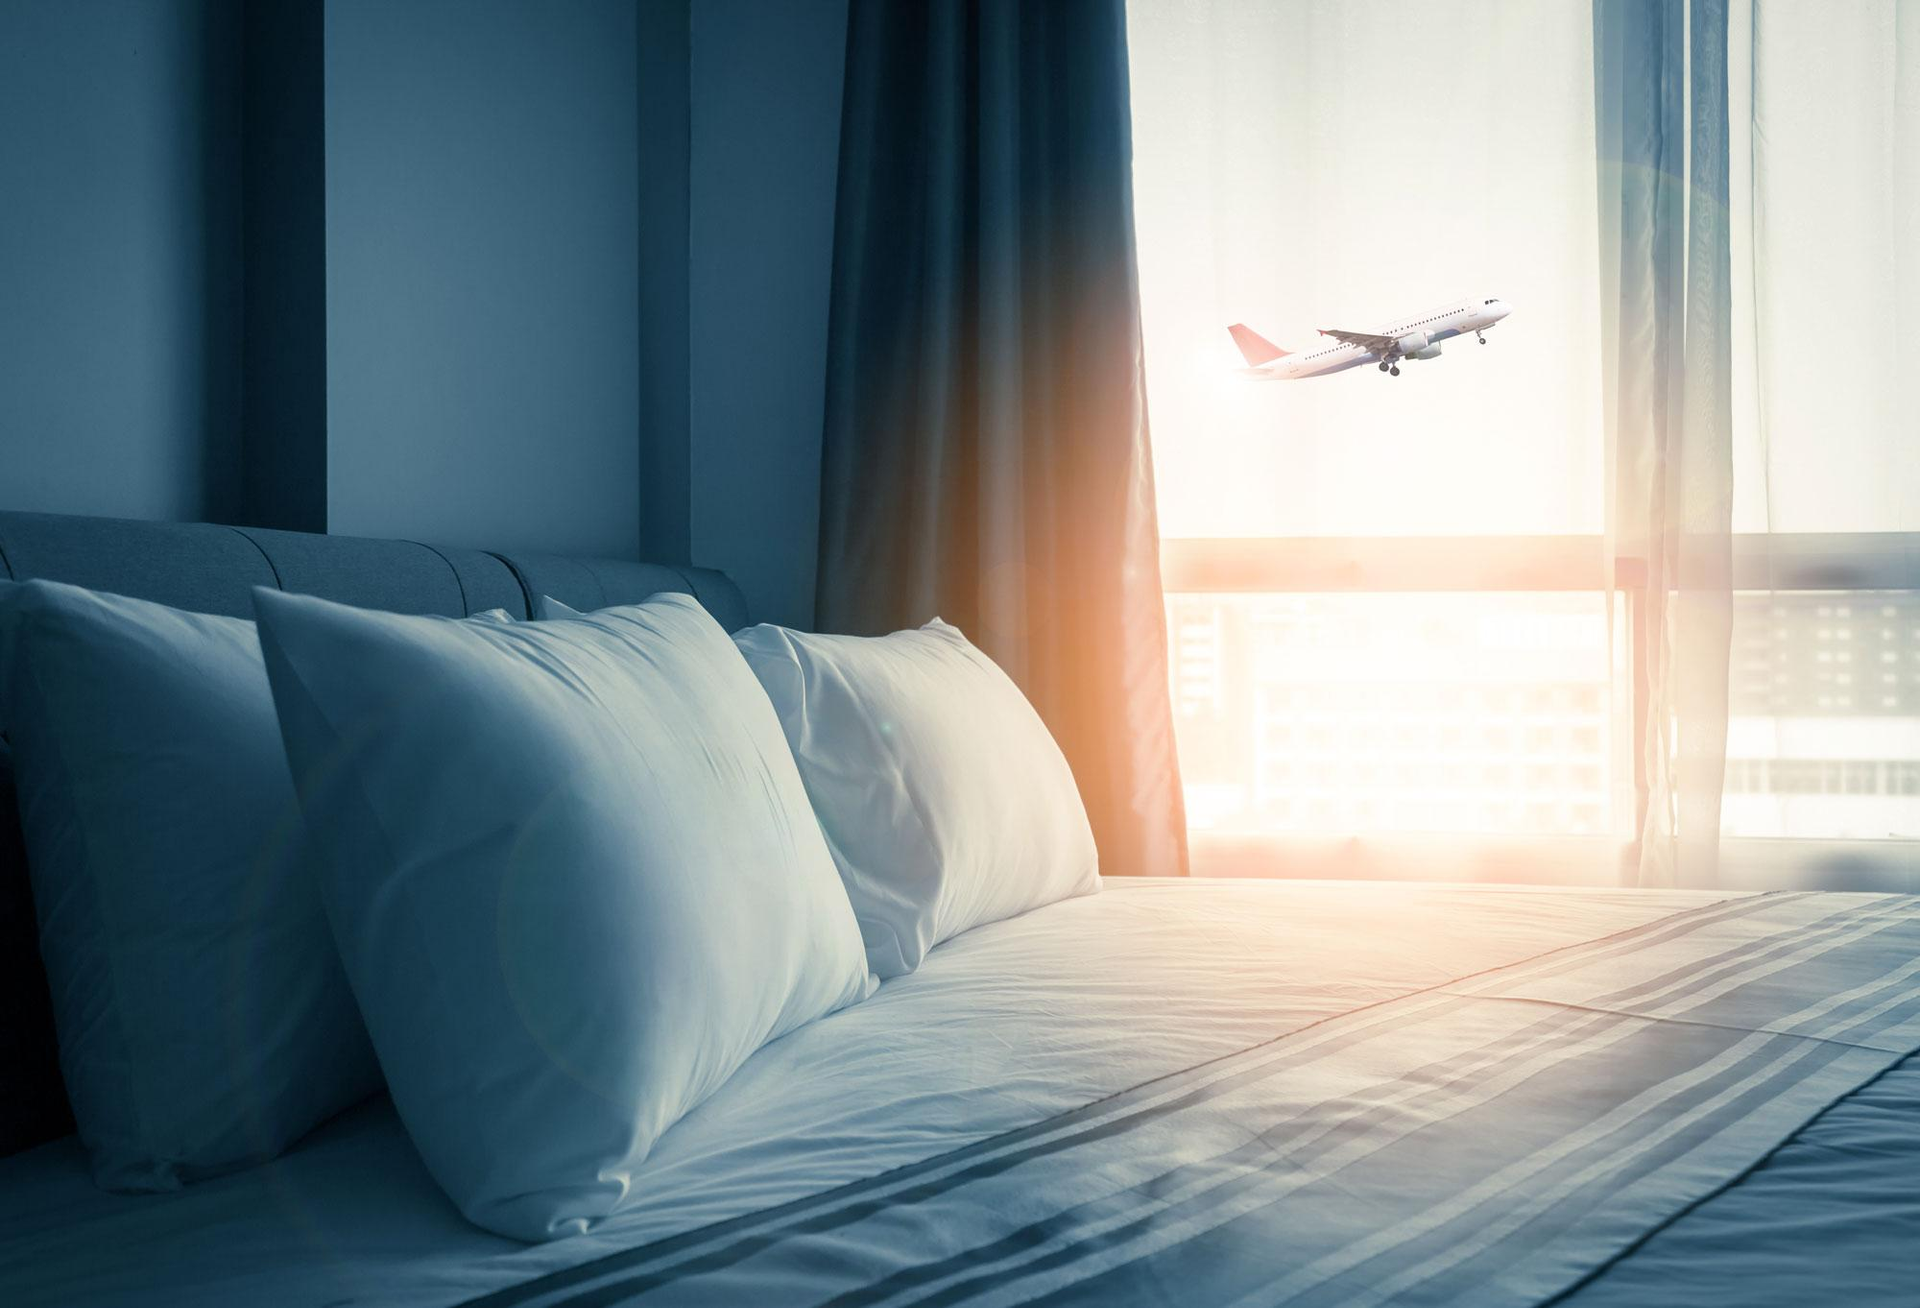 Park Sleep Fly Teacher Discount | Education Discount on Airport Hotels & Airport Parking